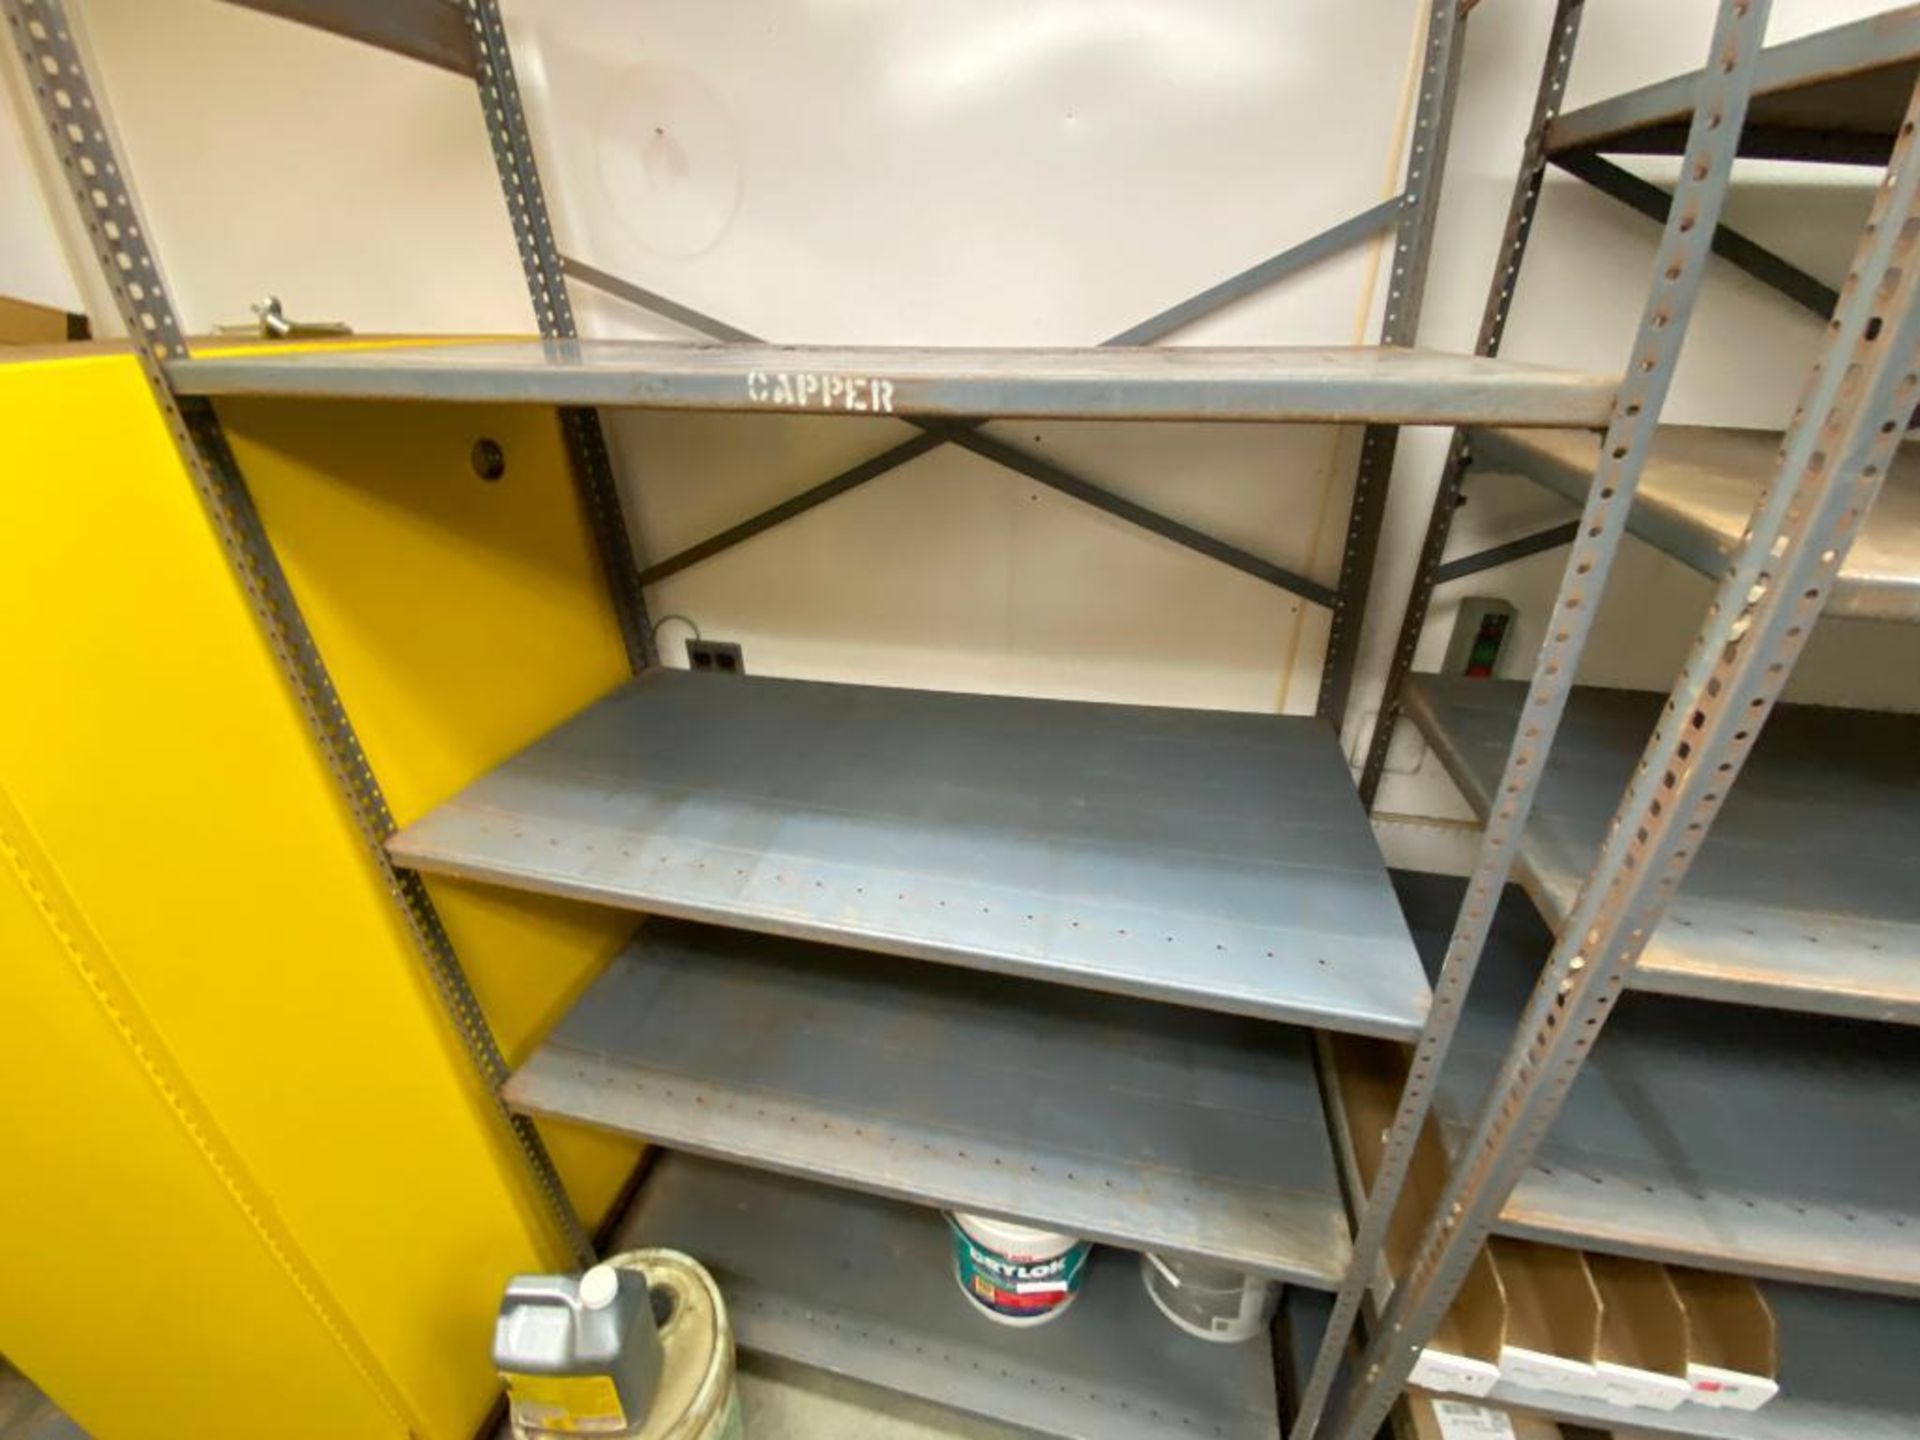 contents of supply room, JustRite flammable storage cabinets, SPX pump, assorted bits, Cryospray, in - Image 14 of 31